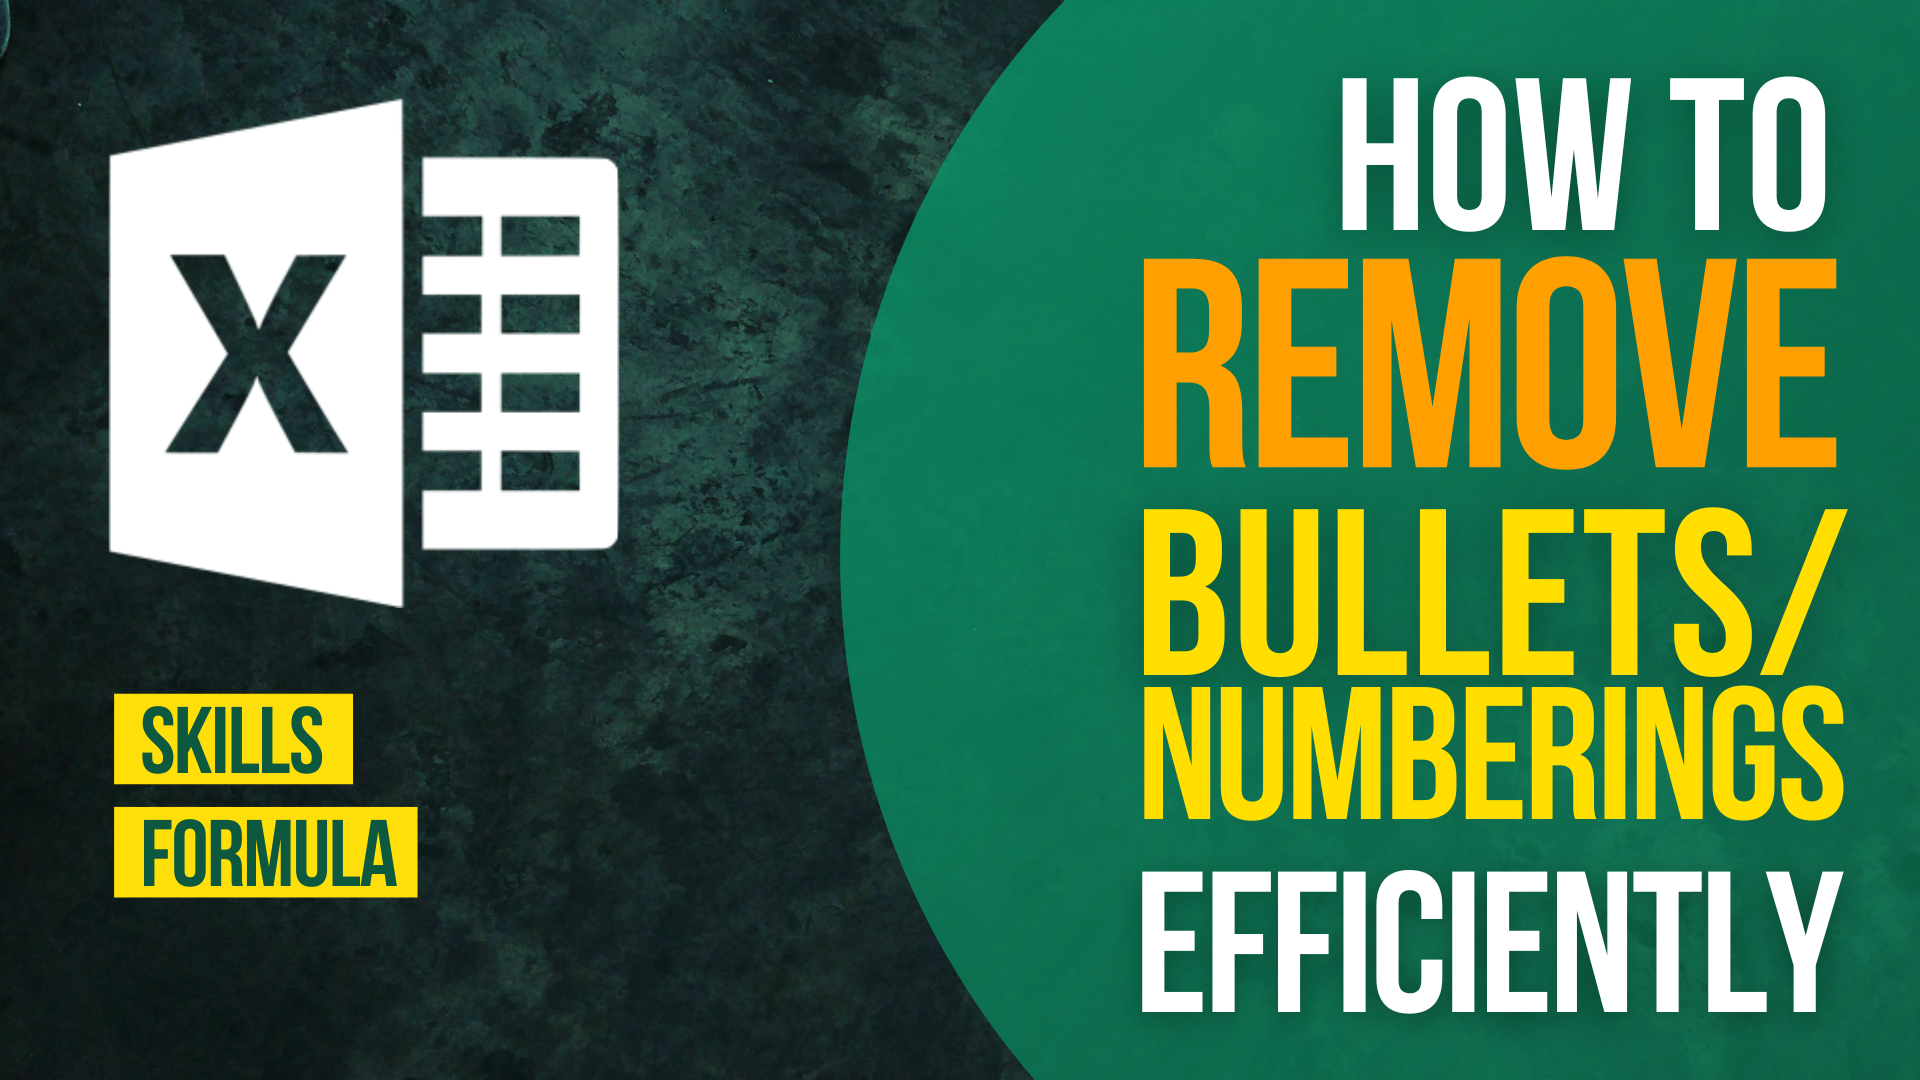 How to remove bullets/numberings in Excel